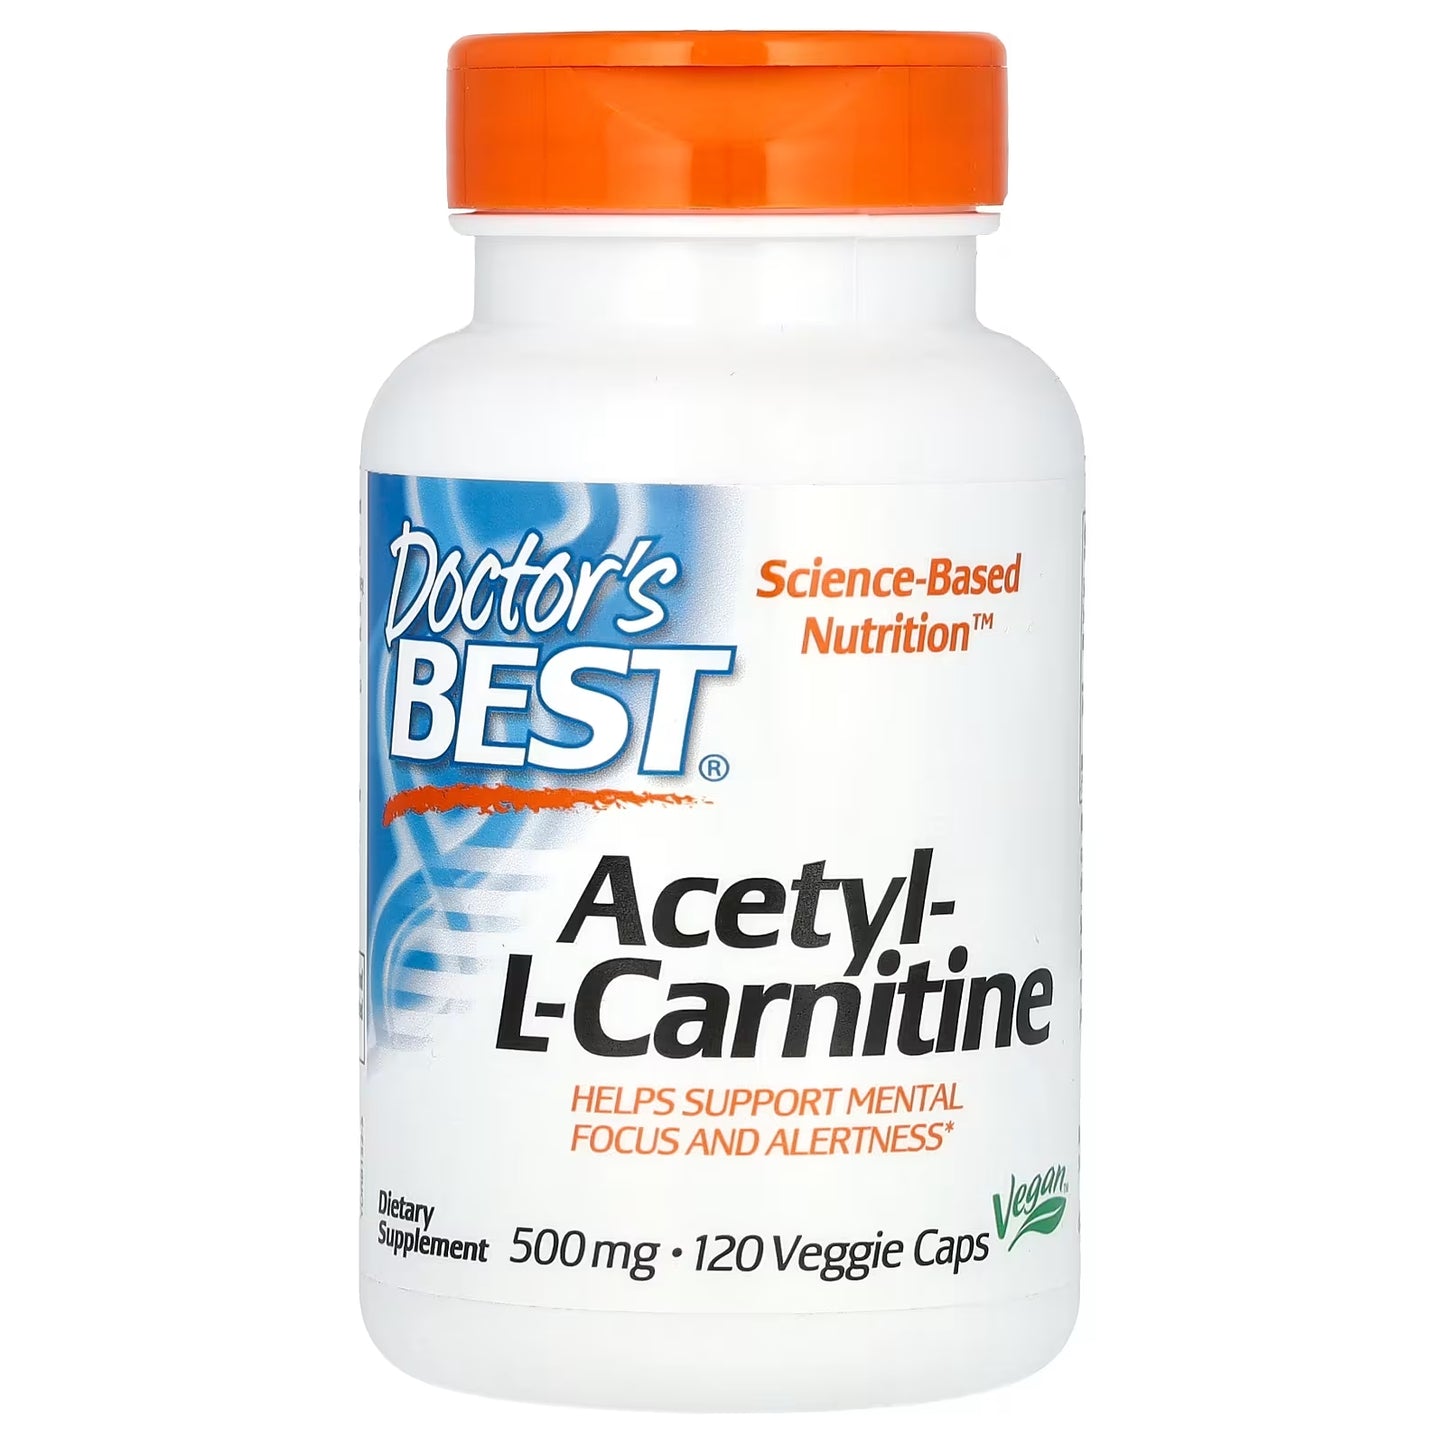 Doctor's Best Acetyl L Carnitine 500mg